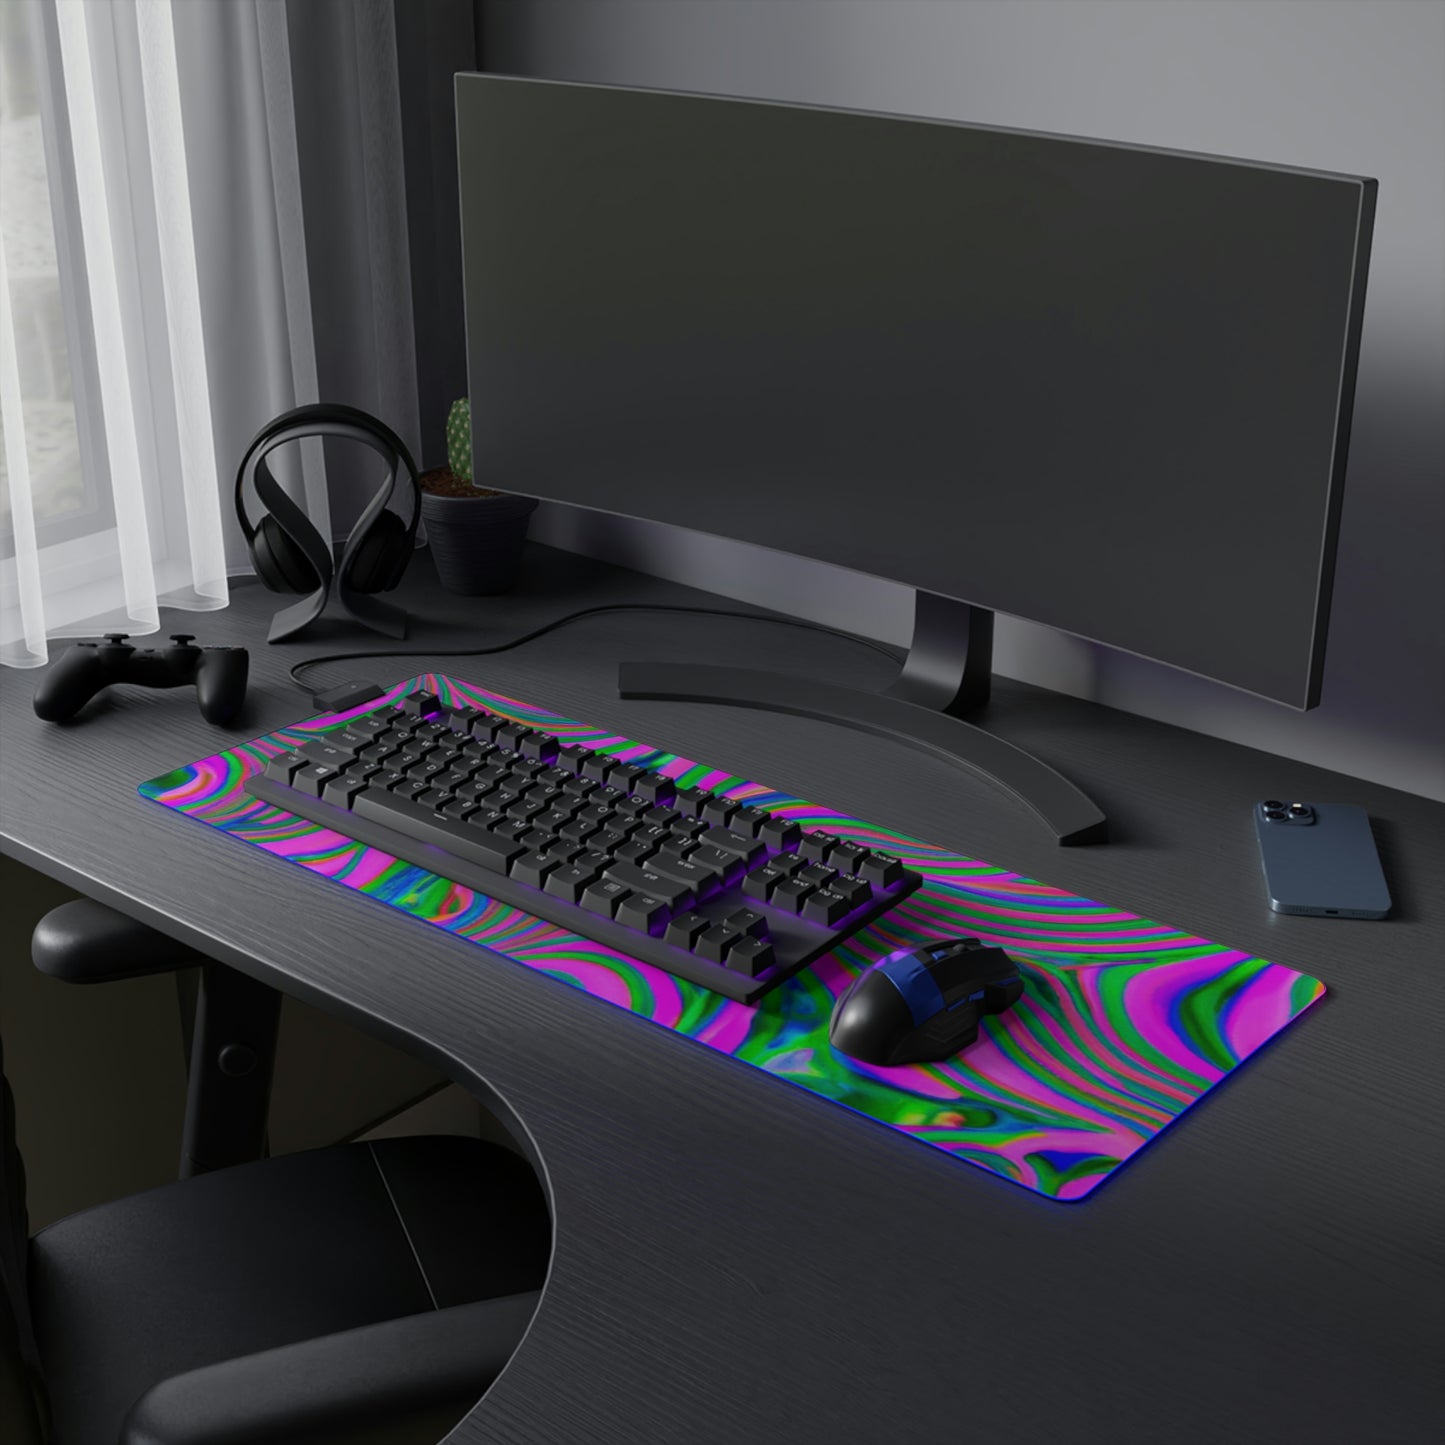 Bipsy Simms - Psychedelic Trippy LED Light Up Gaming Mouse Pad